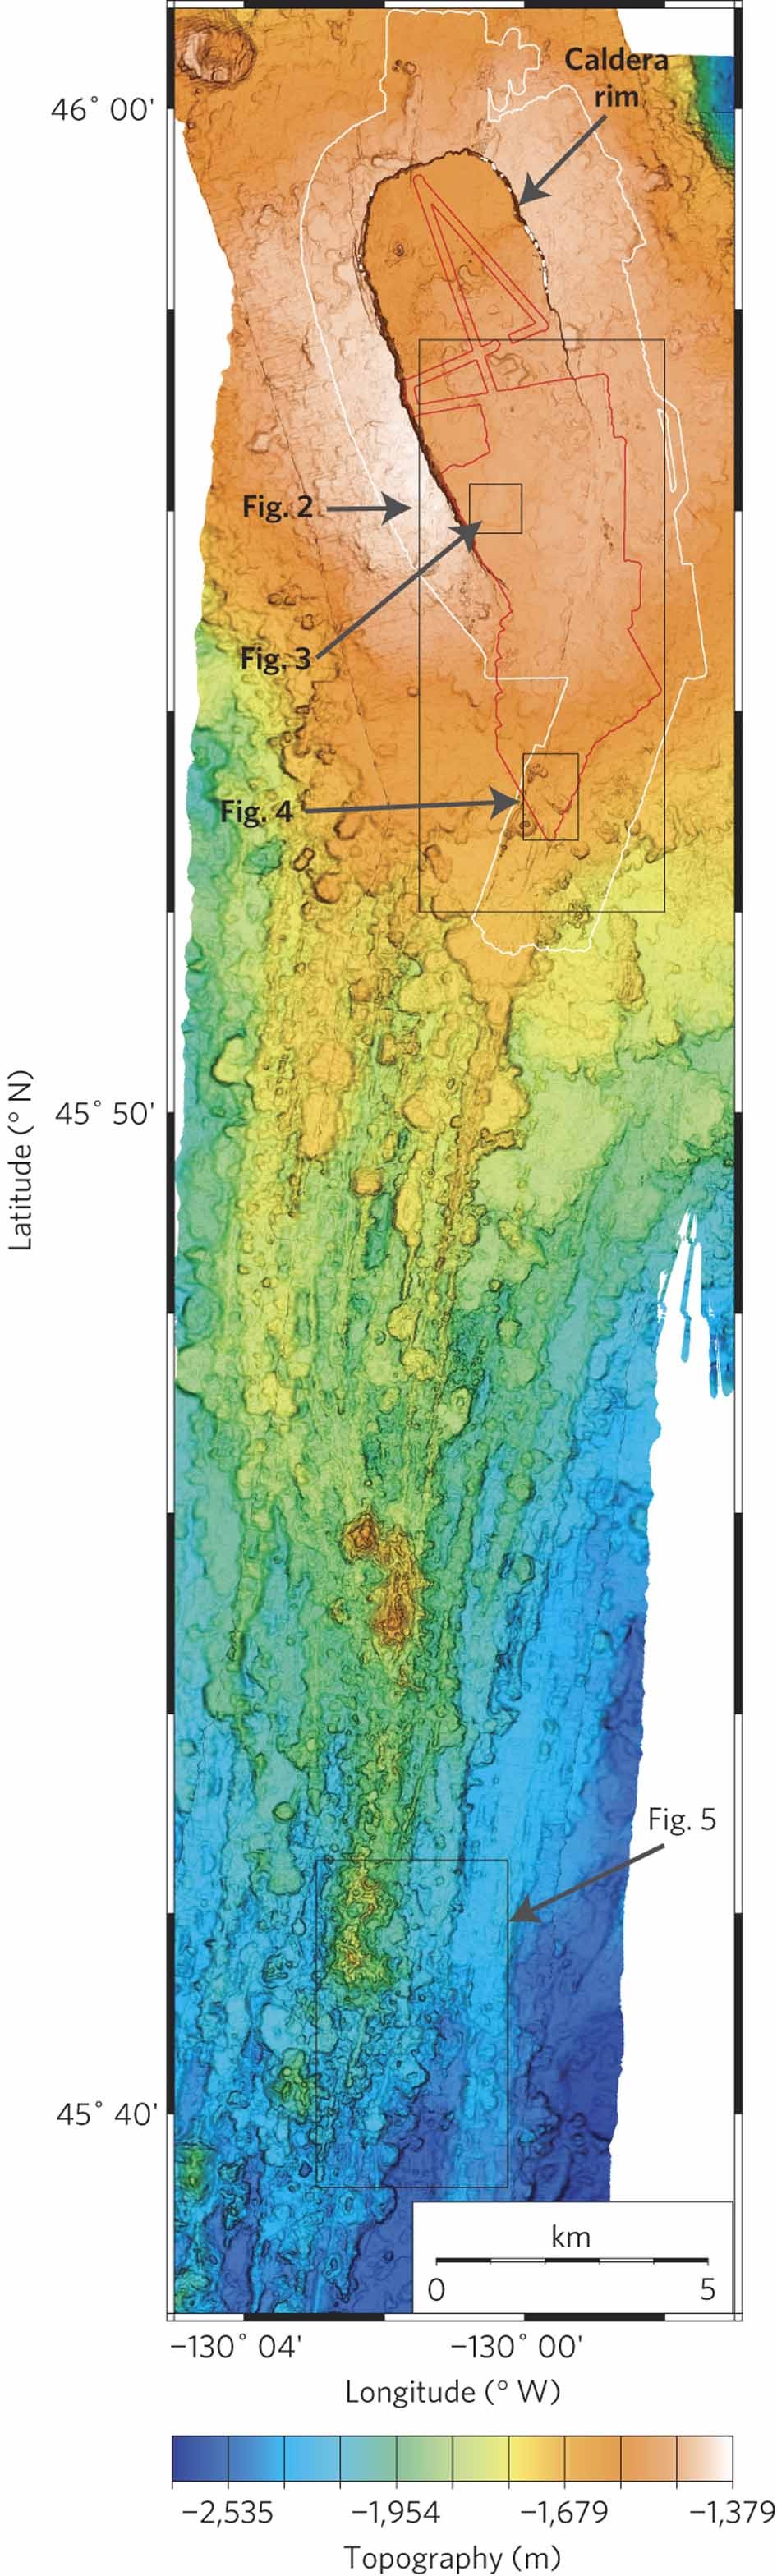 Repeat Bathymetric Surveys At 1 Metre Resolution Of Lava Flows Erupted At Axial Seamount In April 11 Nature Geoscience